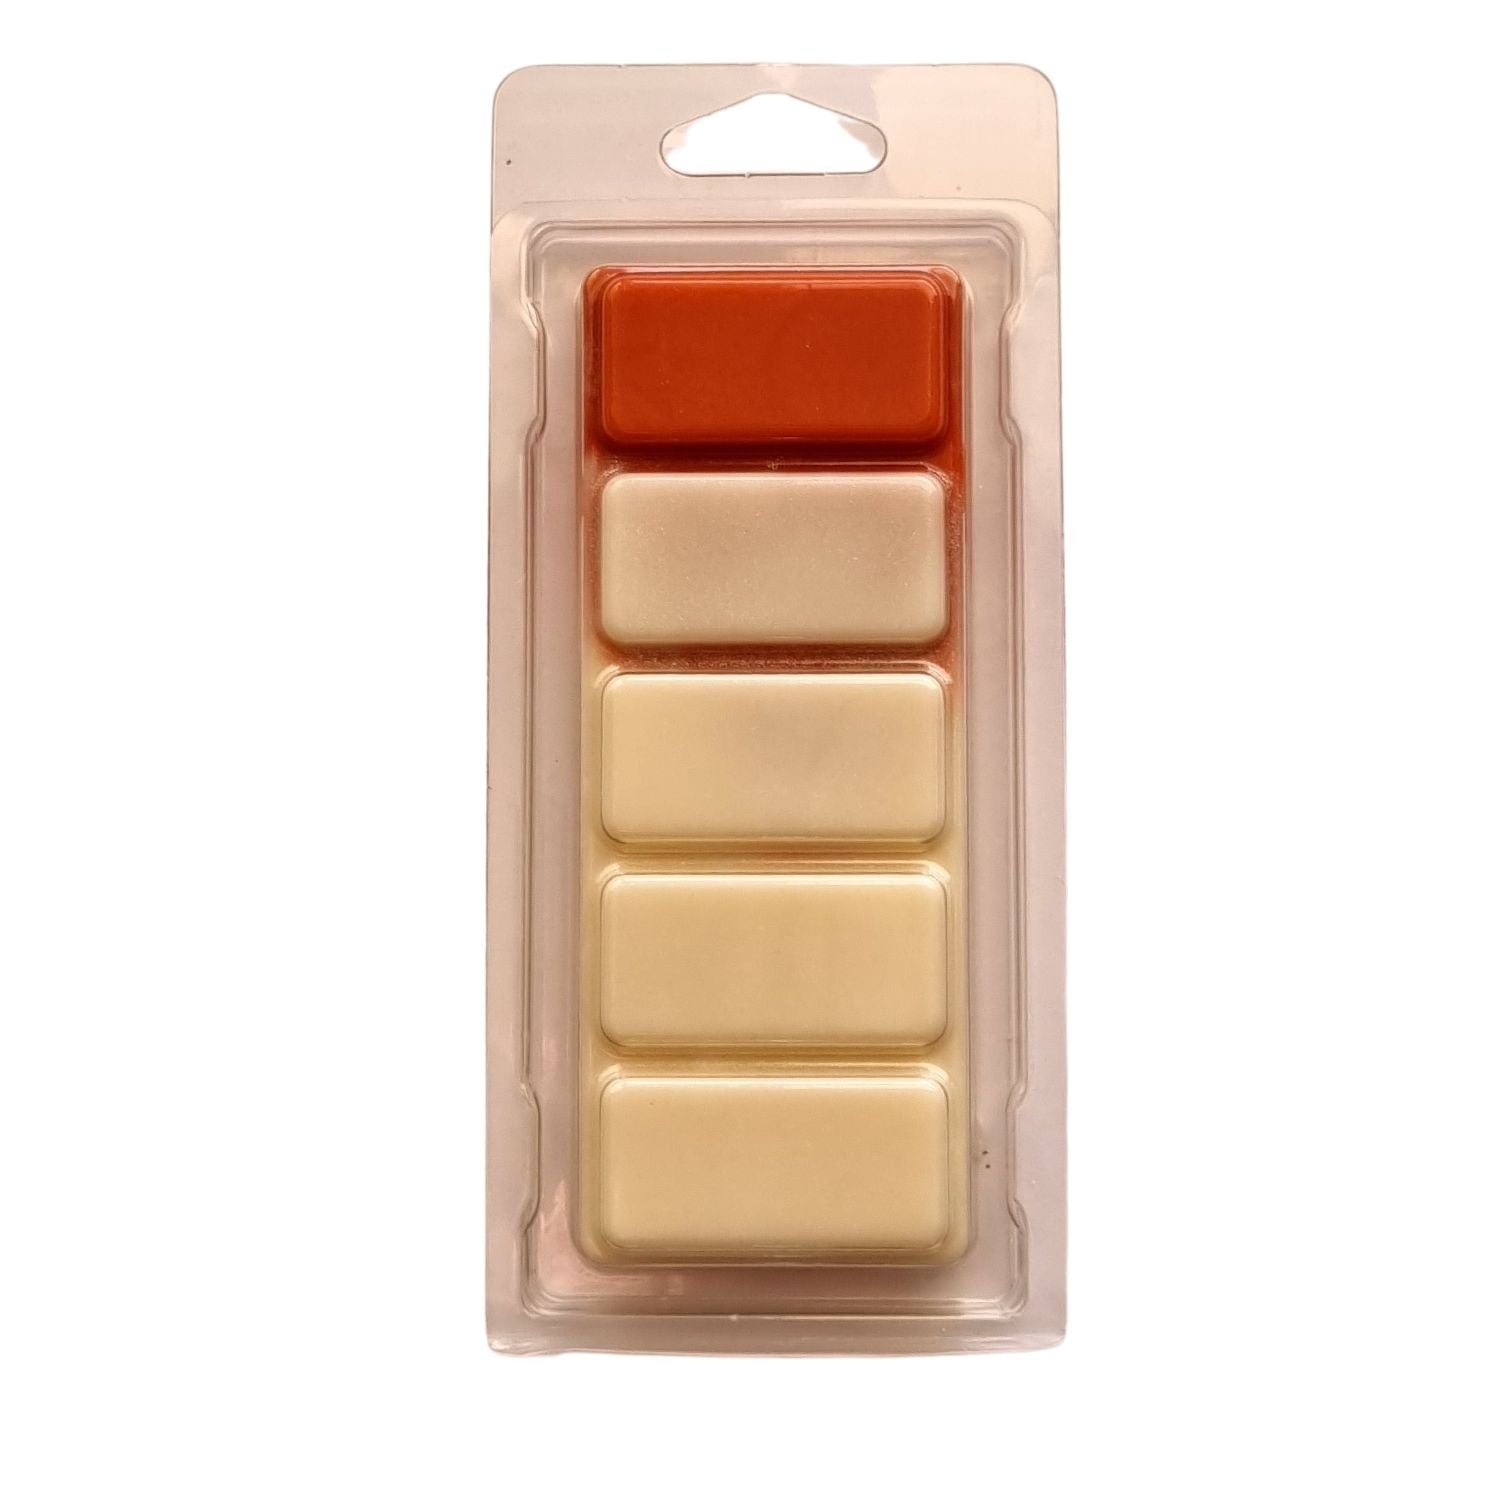  a brown and white wax melt bar in a clamshell